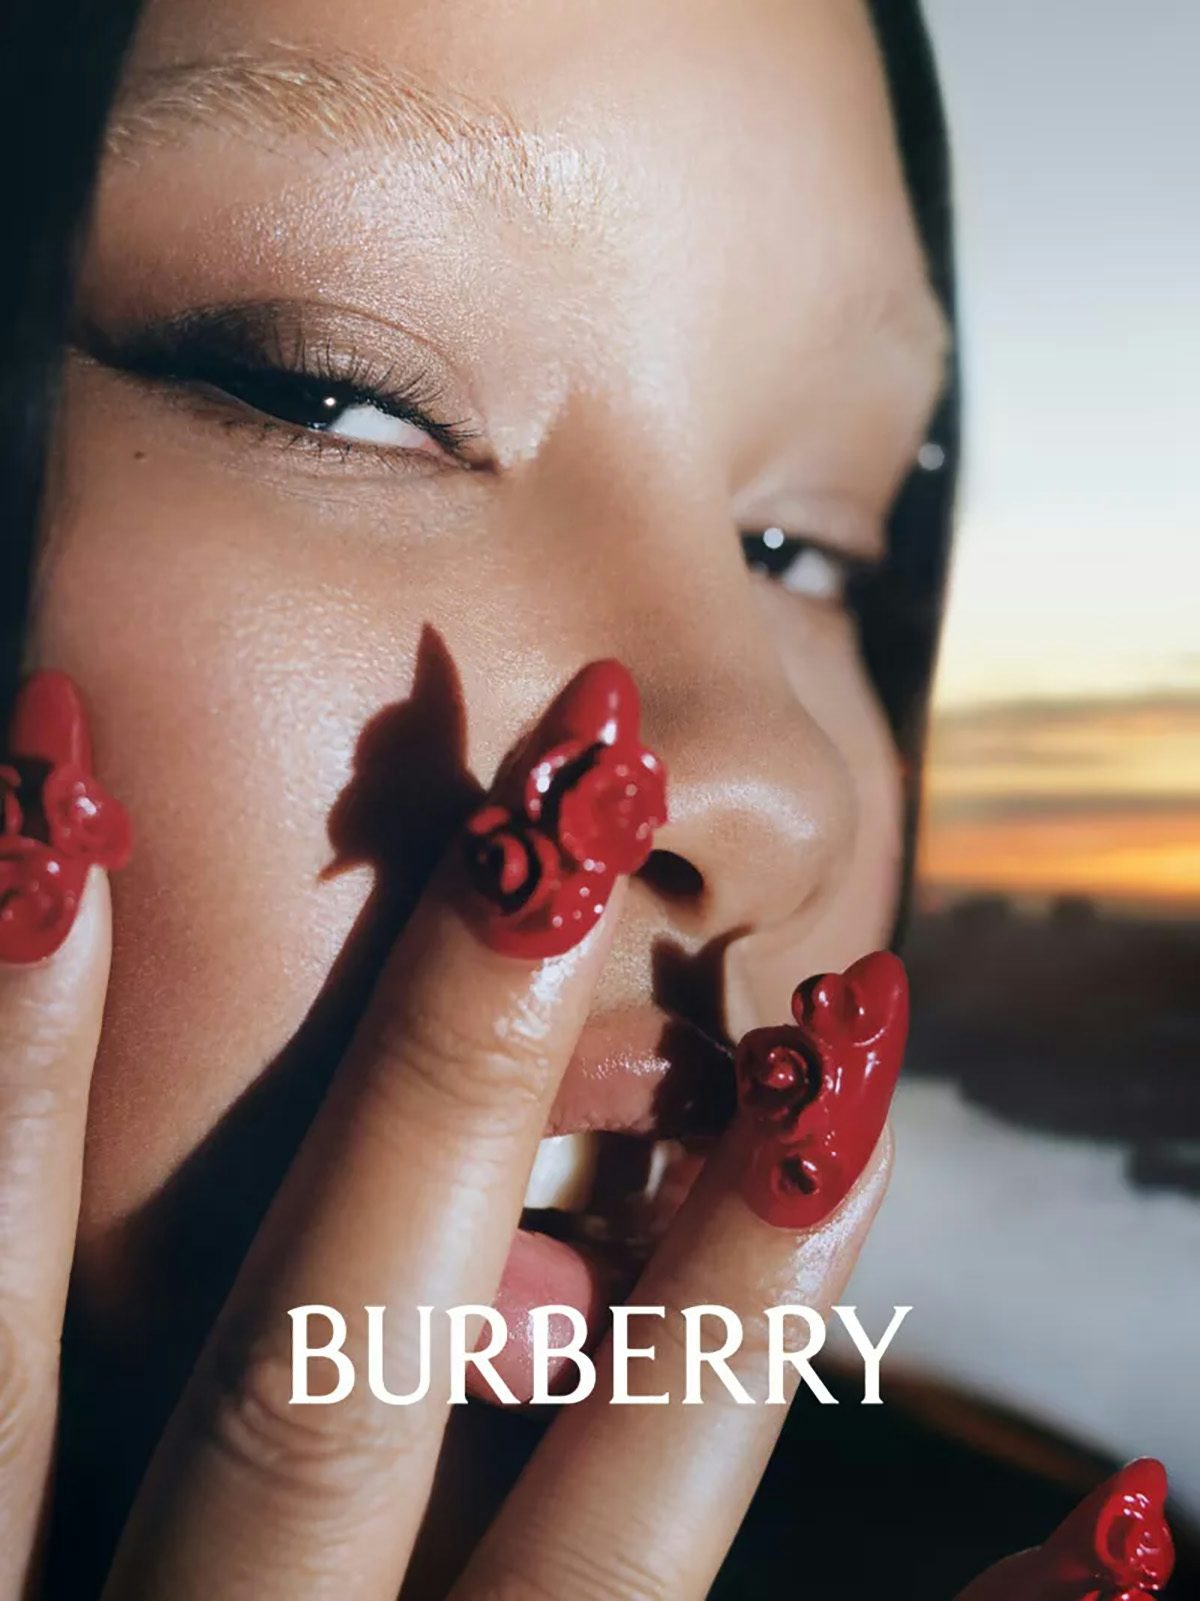 Image shows a close-up portrait of Shygirl wearing nails embellished with roses, next to the new Burberry wordmark